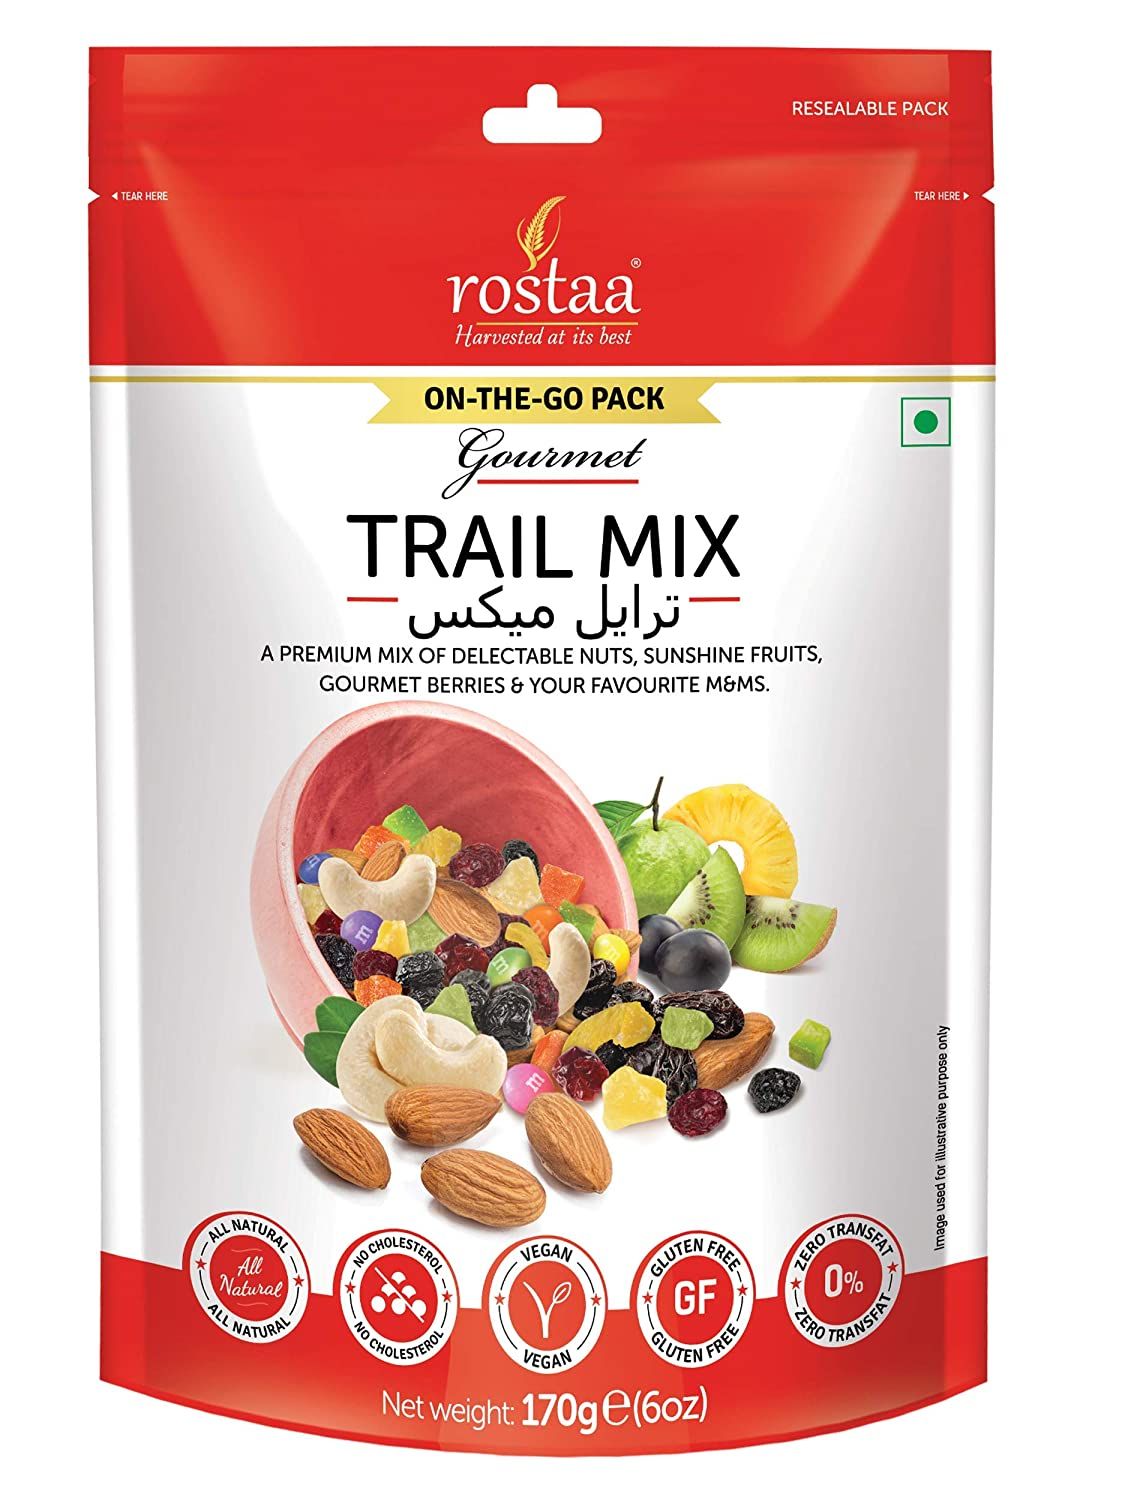 Rostaa Trail Mix Pouch Image